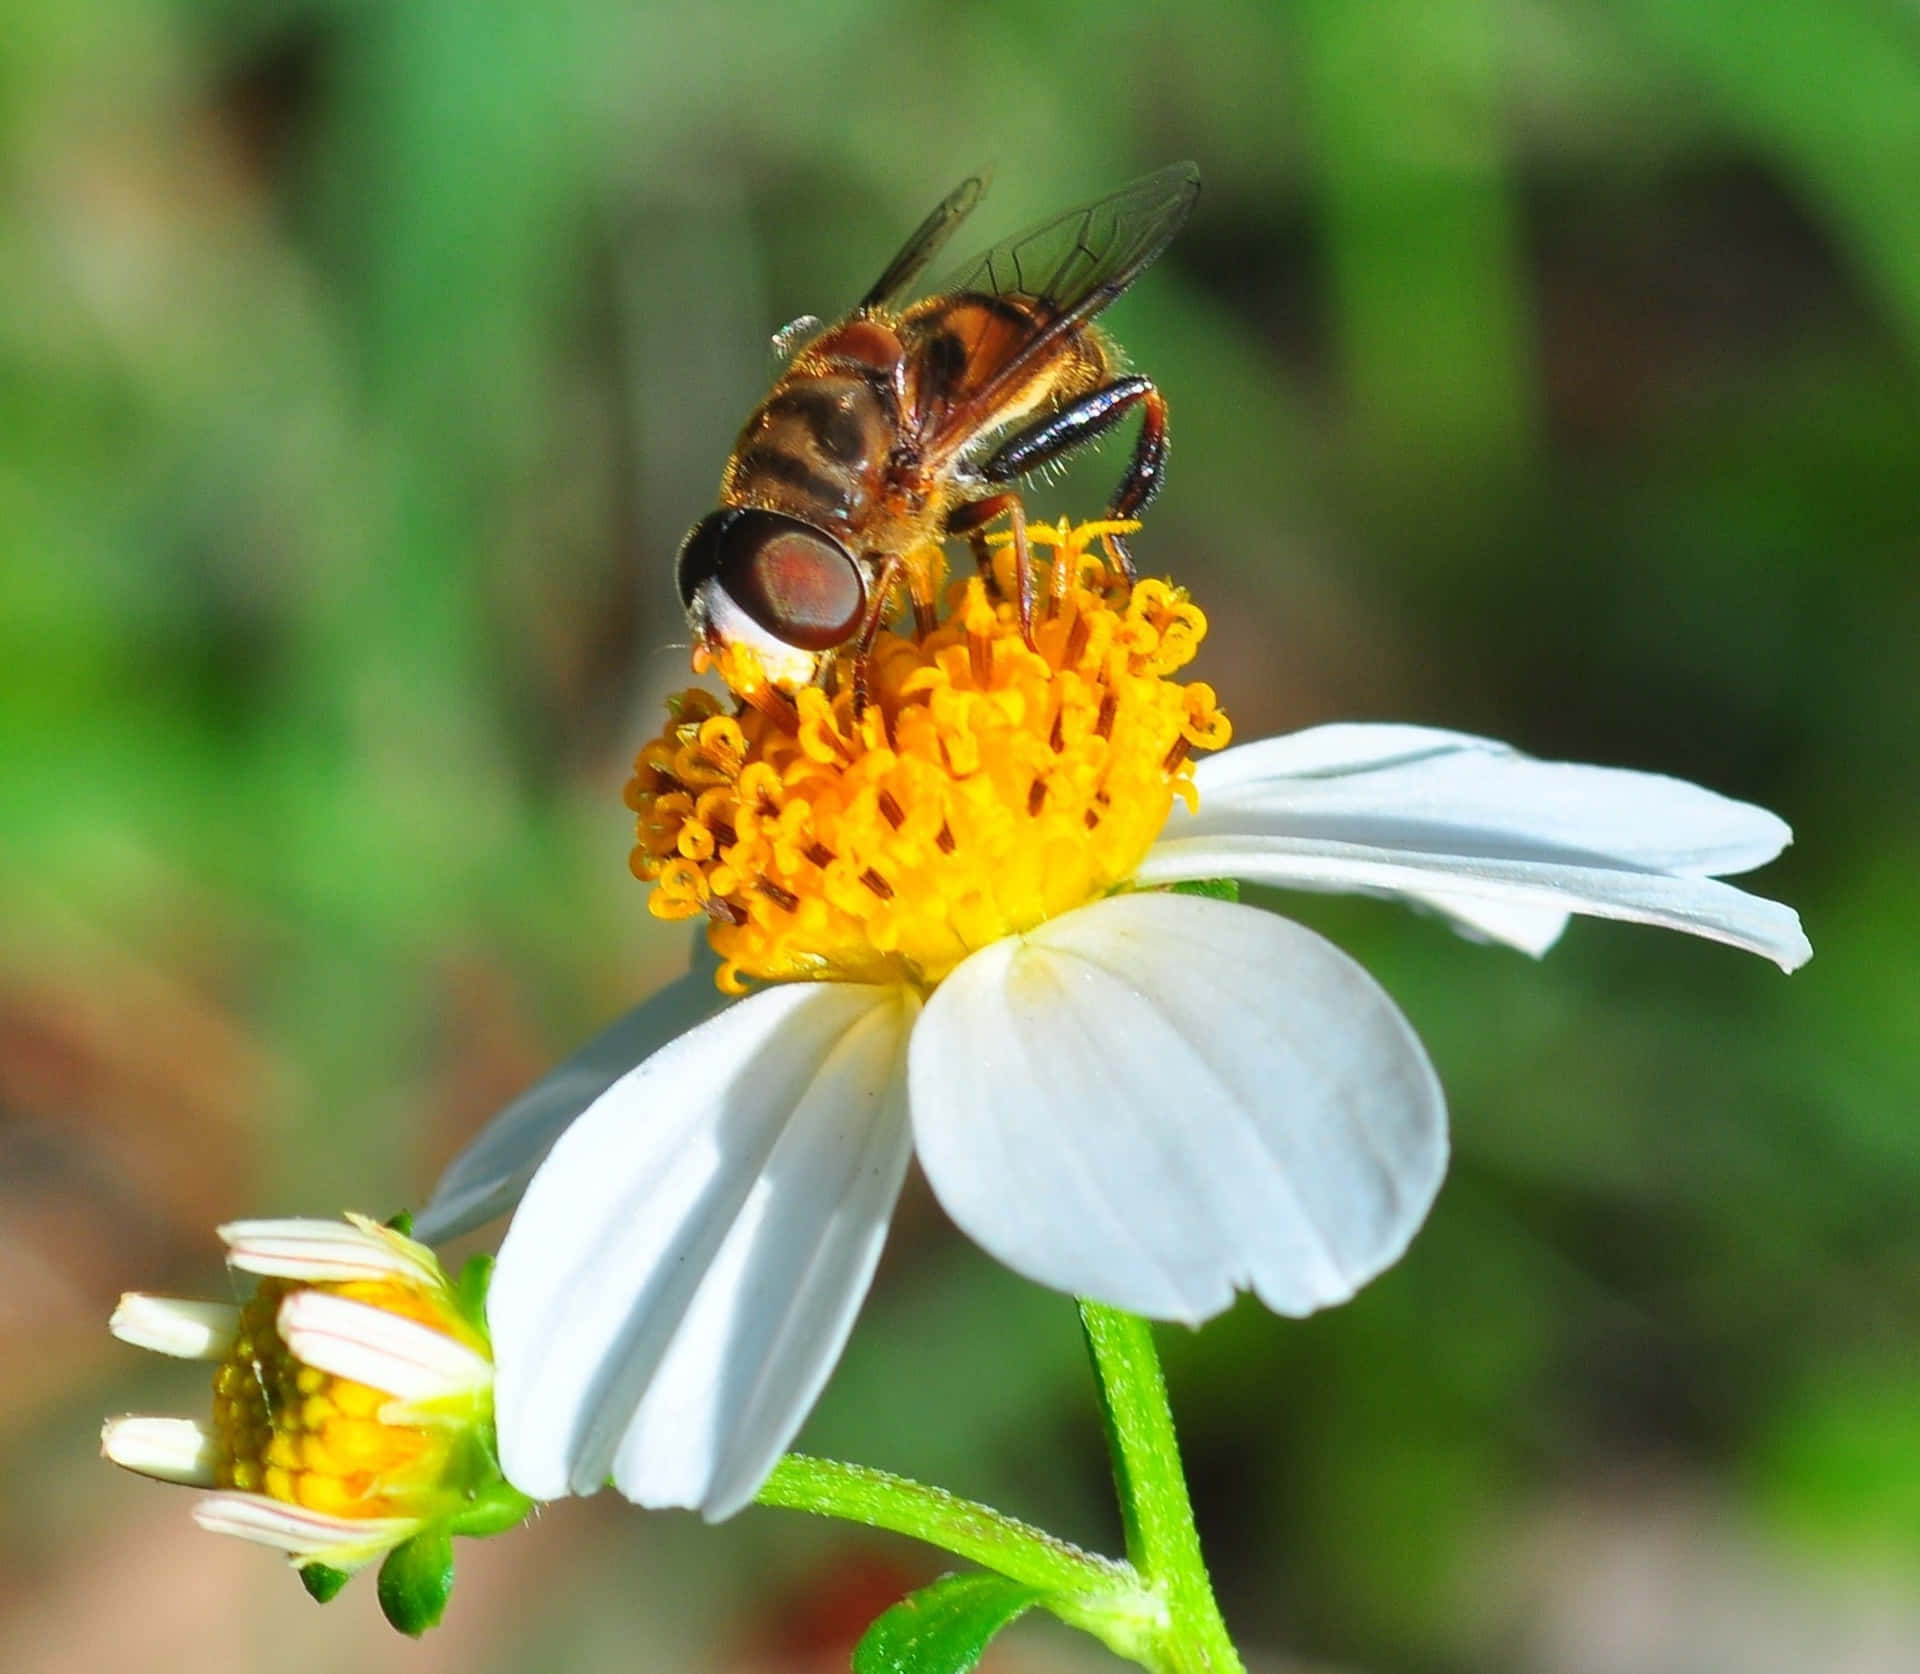 This bee is enjoying its nutritious breakfast at a flower.